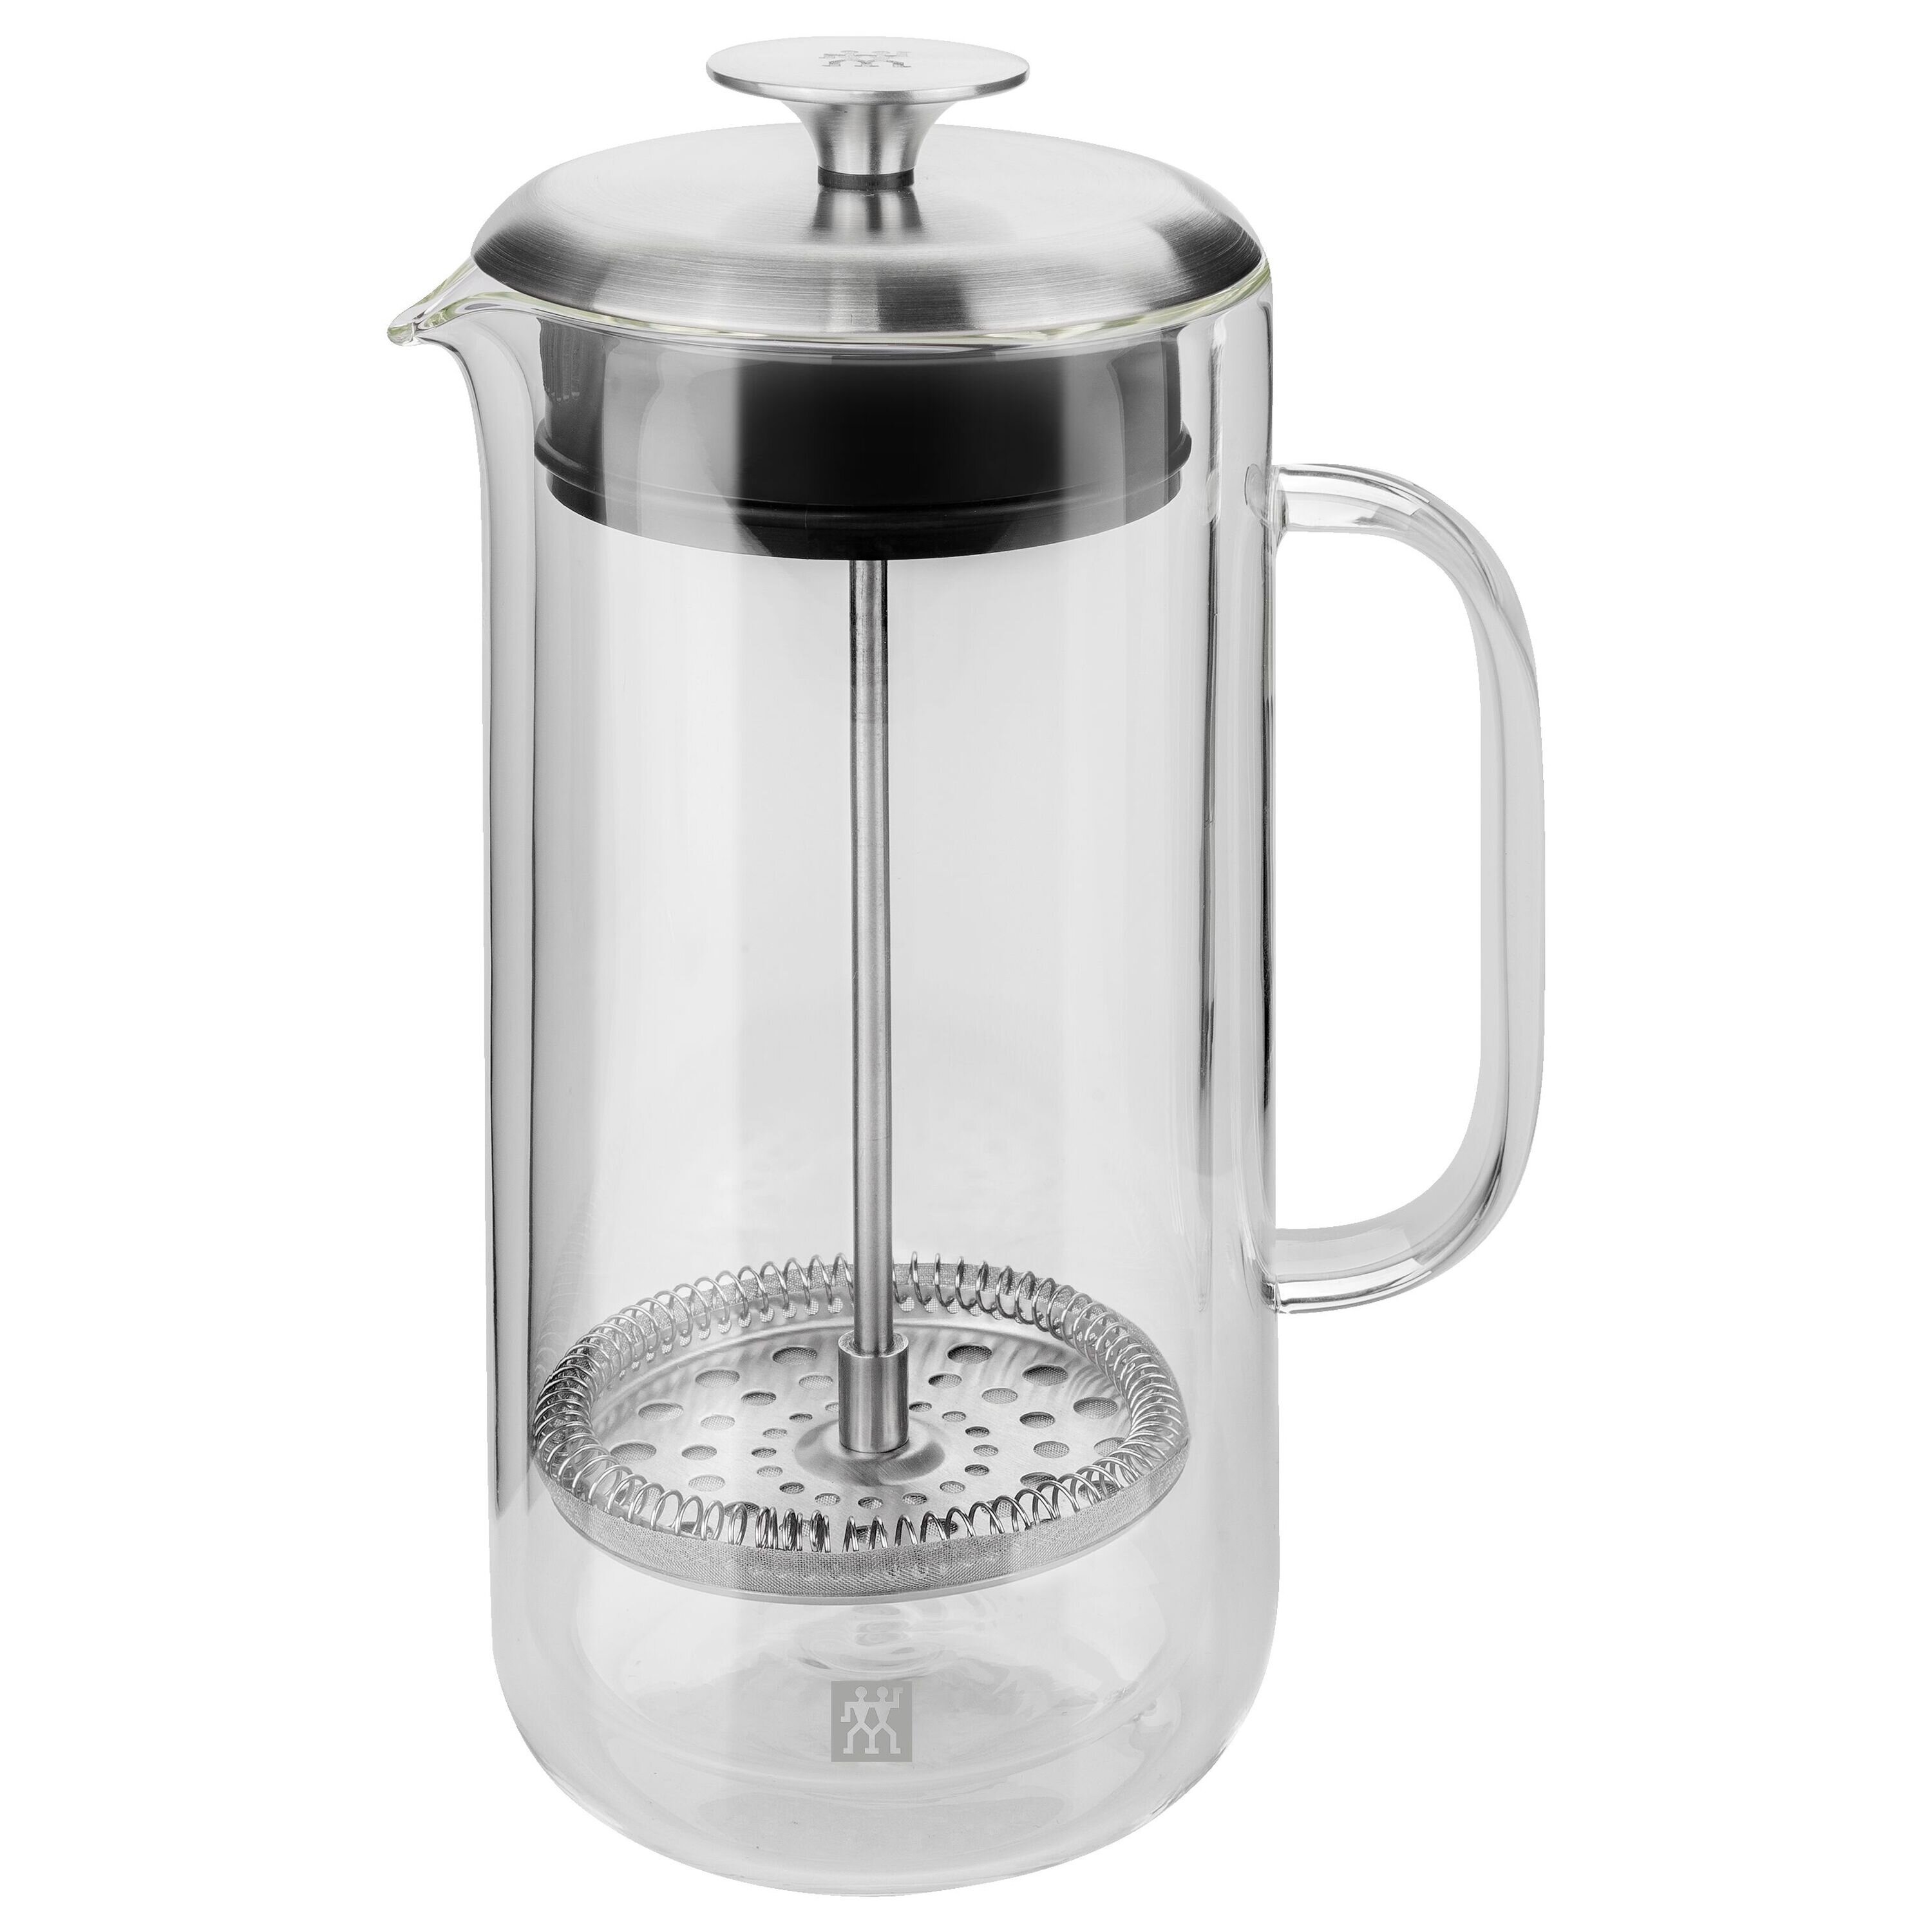 27oz Coffee Carafe 18/10 Stainless Steel/Double Walled Vacuum Insulate